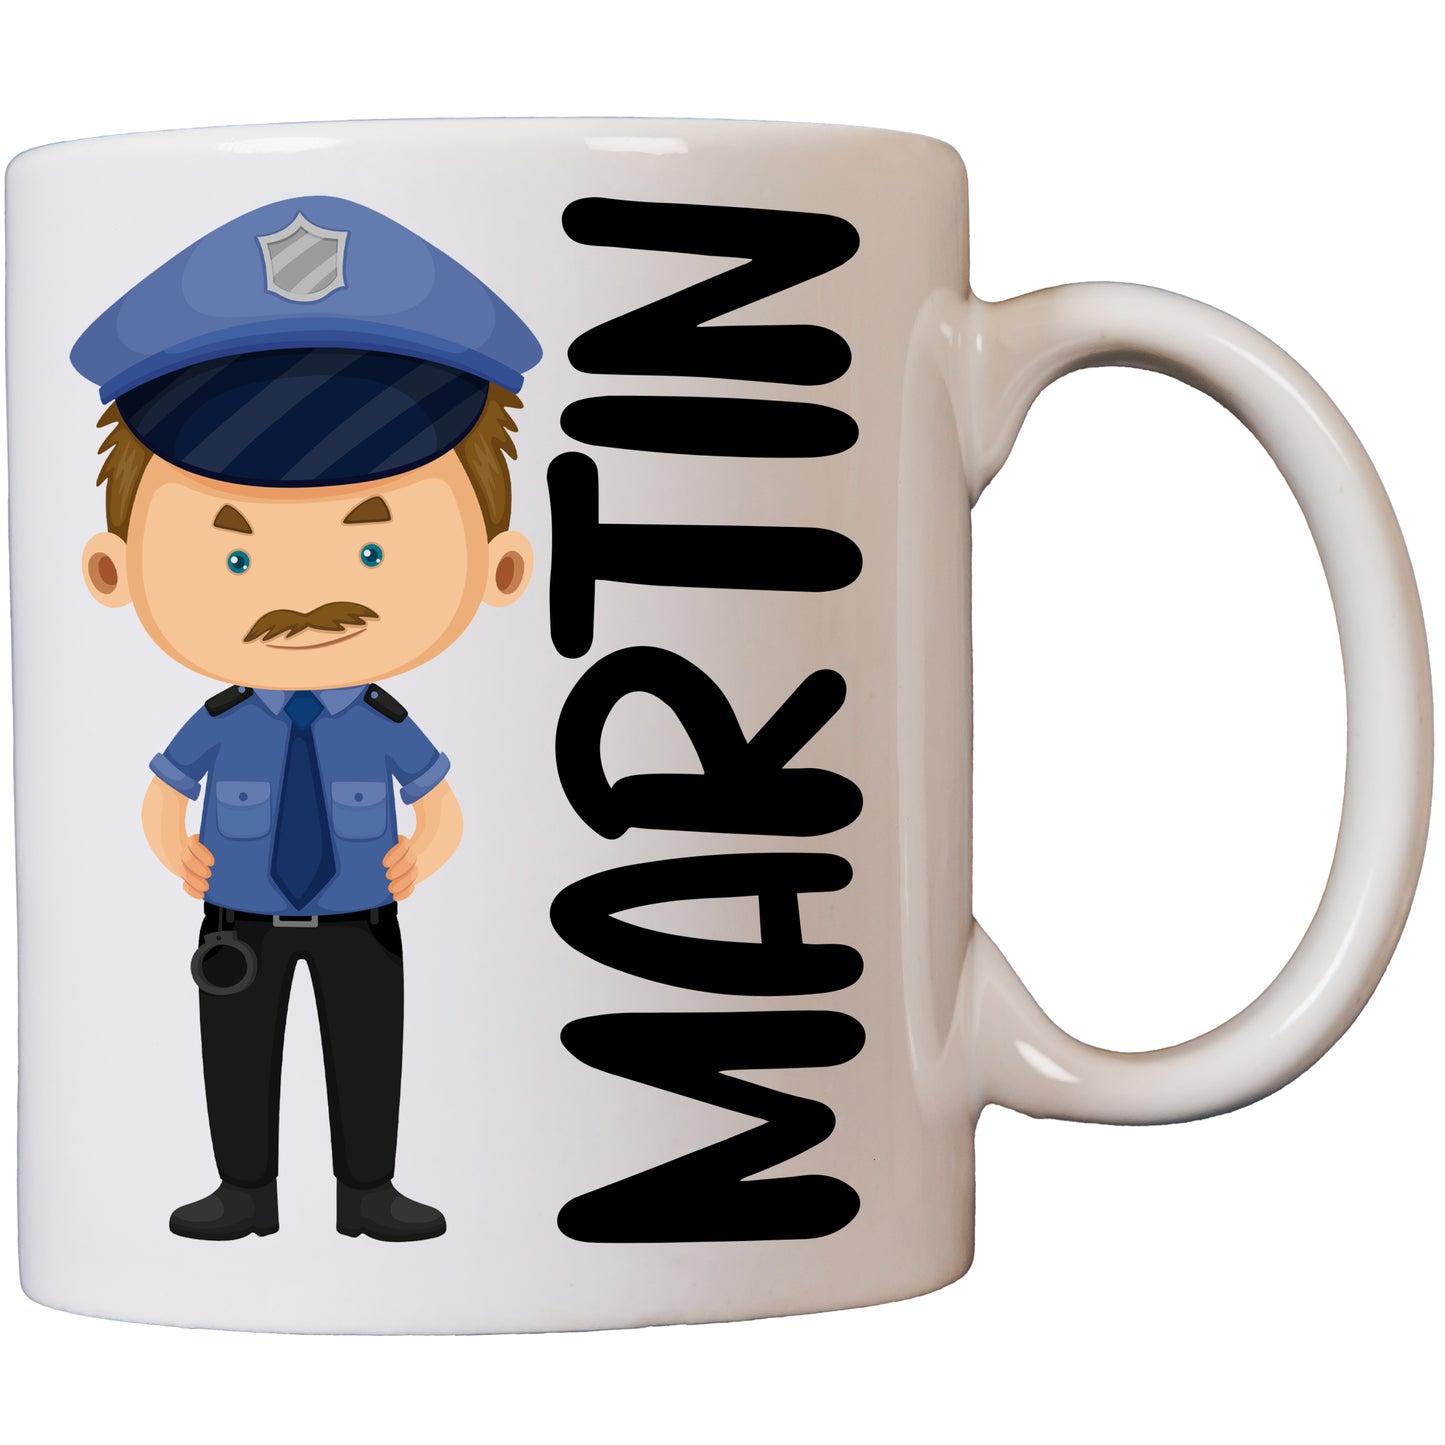 Male Police Officer Personalised Coffee/Tea Mug Cup - Novelty Gift 11oz